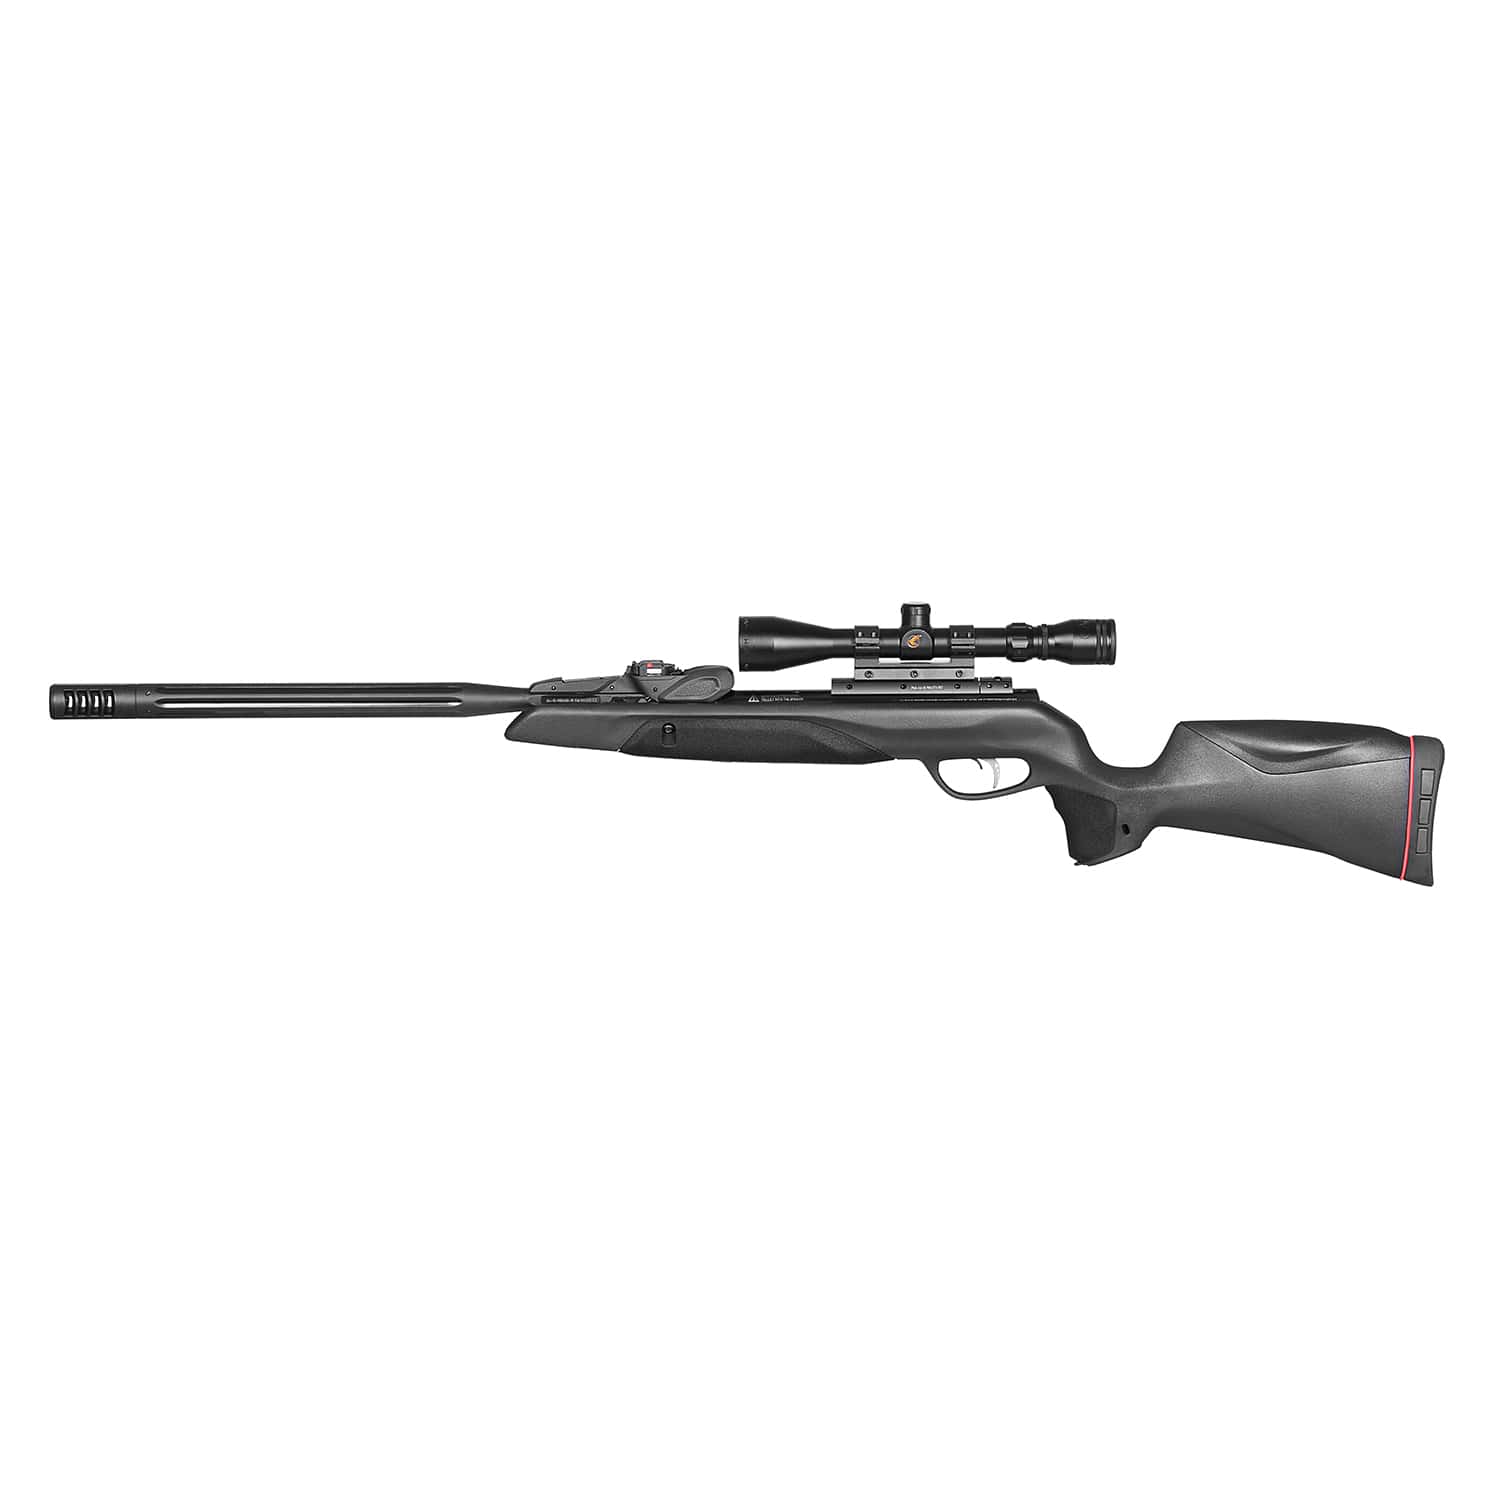 GAMO 6110038554 Swarm Maxxim G2 .177cal IGT Gas Piston Powered Pellet Air Rifle with 3-9x40mm Scope